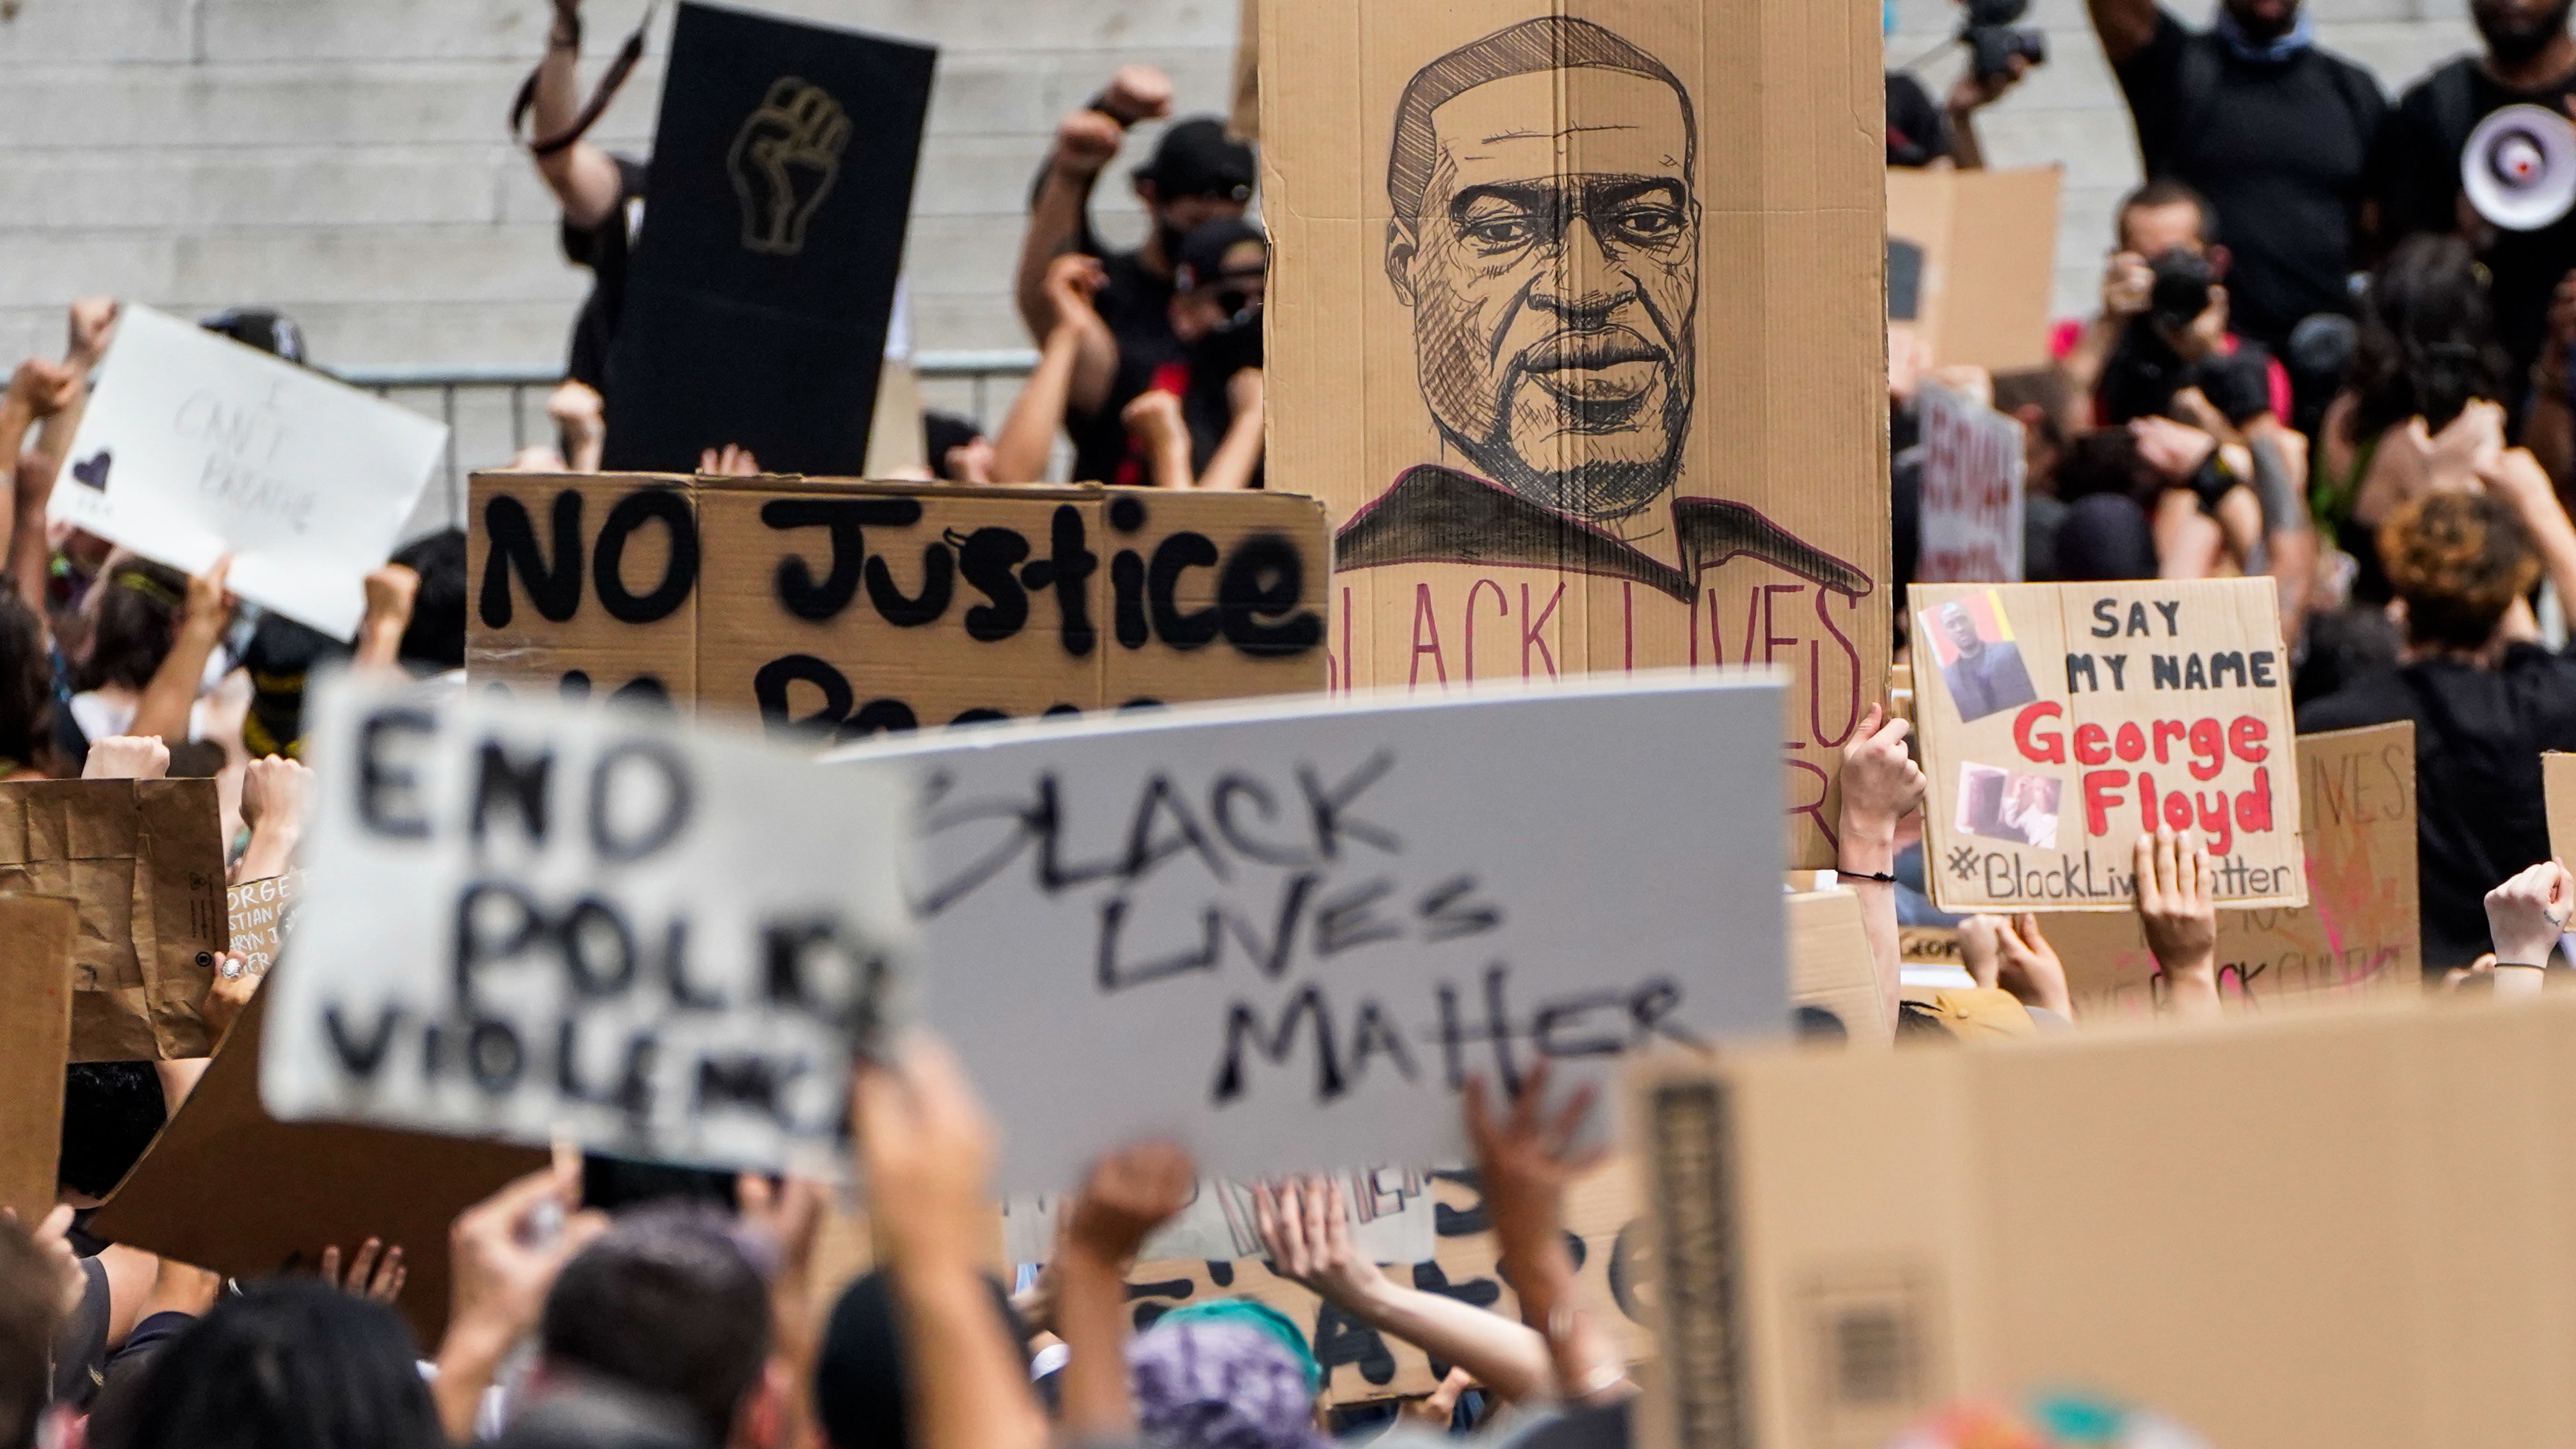 A BLM protest in Los Angeles following the death of George Floyd